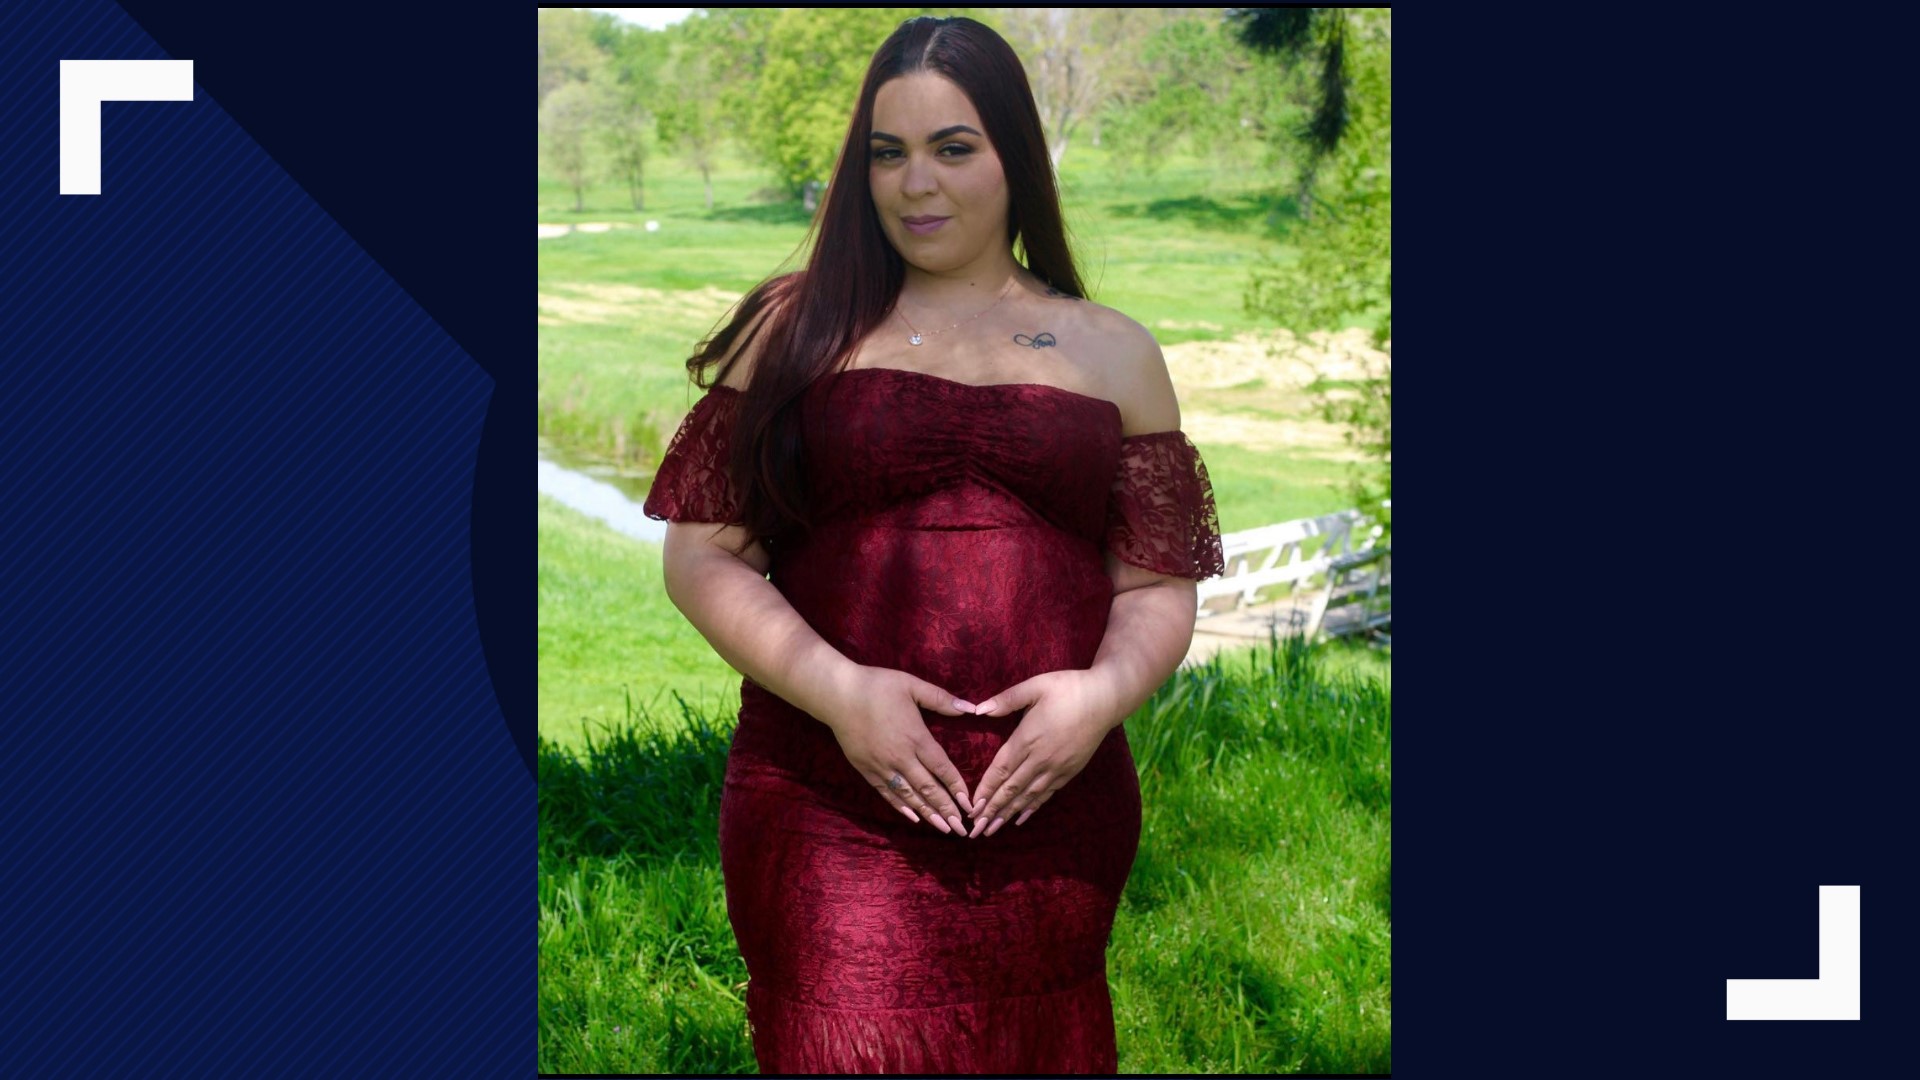 Ciara Villegas, 31, was taken to a local hospital where an emergency C-section was performed, the family told ABC10. Both she and her infant son remain in the hospital in critical condition, authorities say.